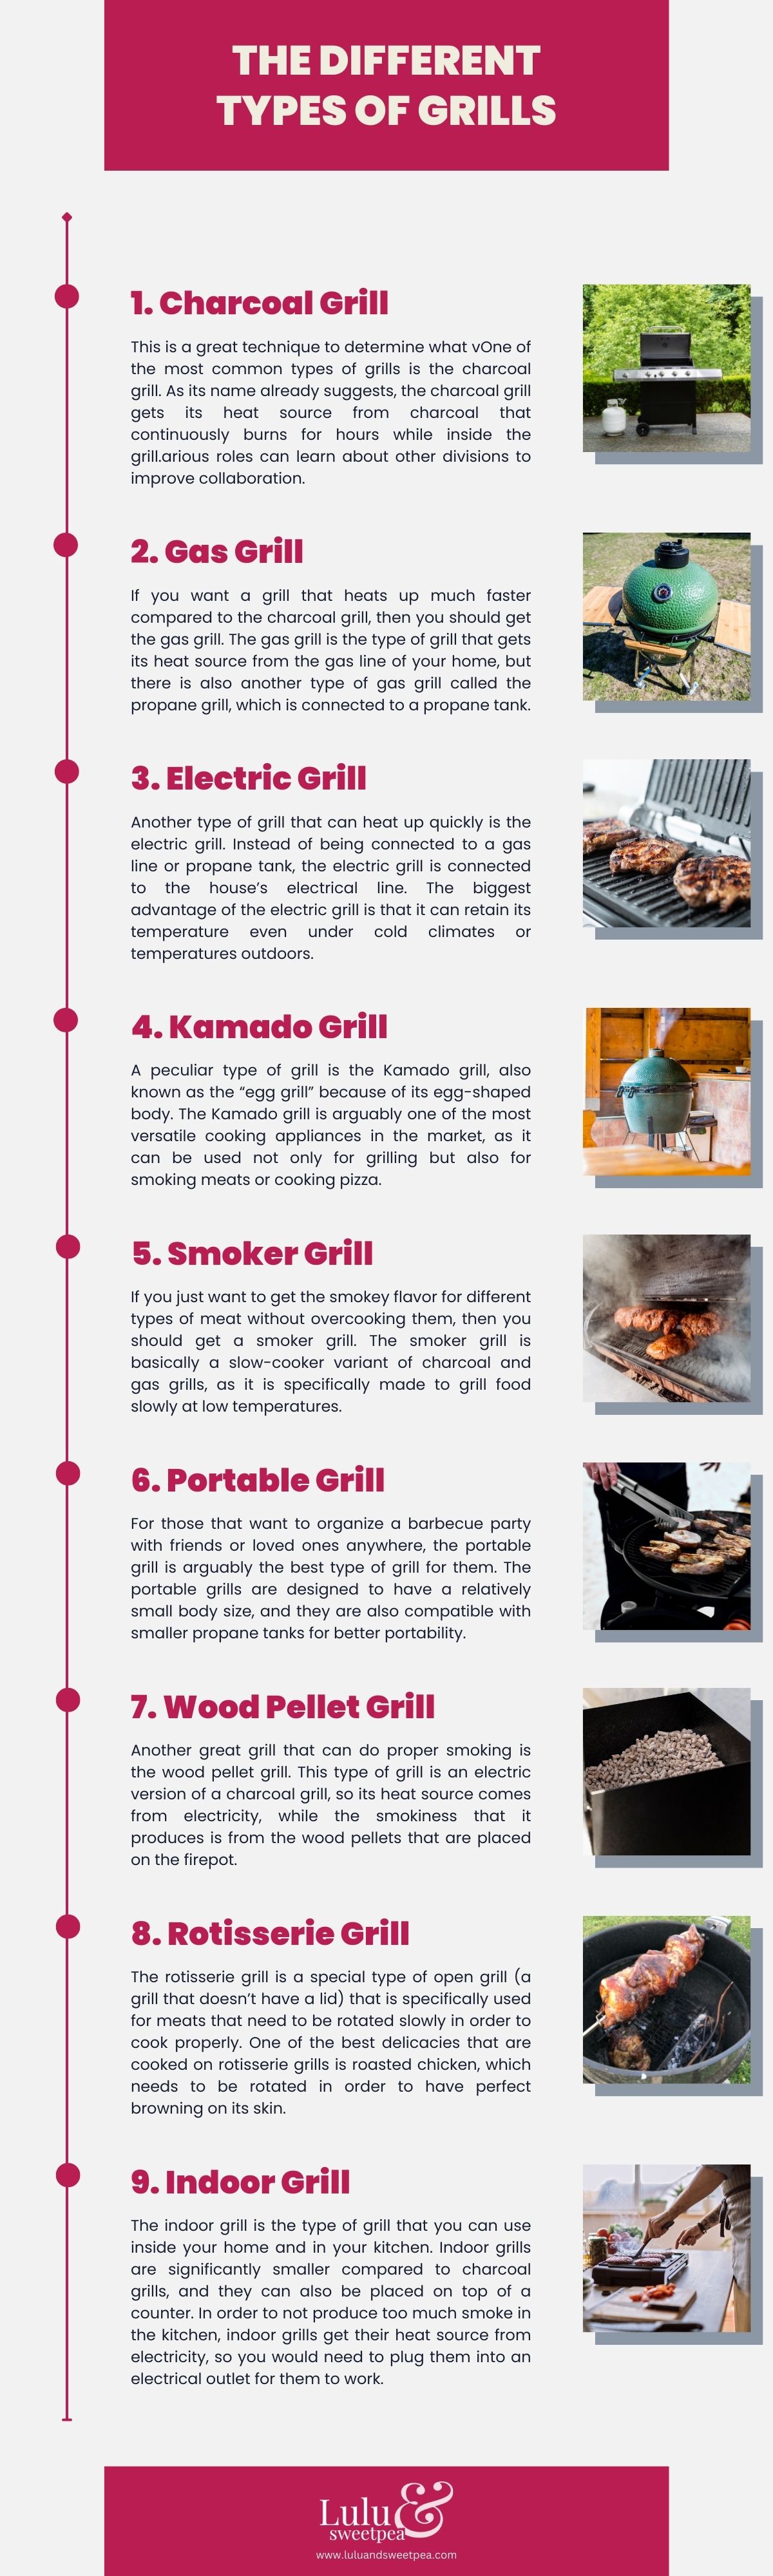 4. Know Your Type of Grill for the Grigliata